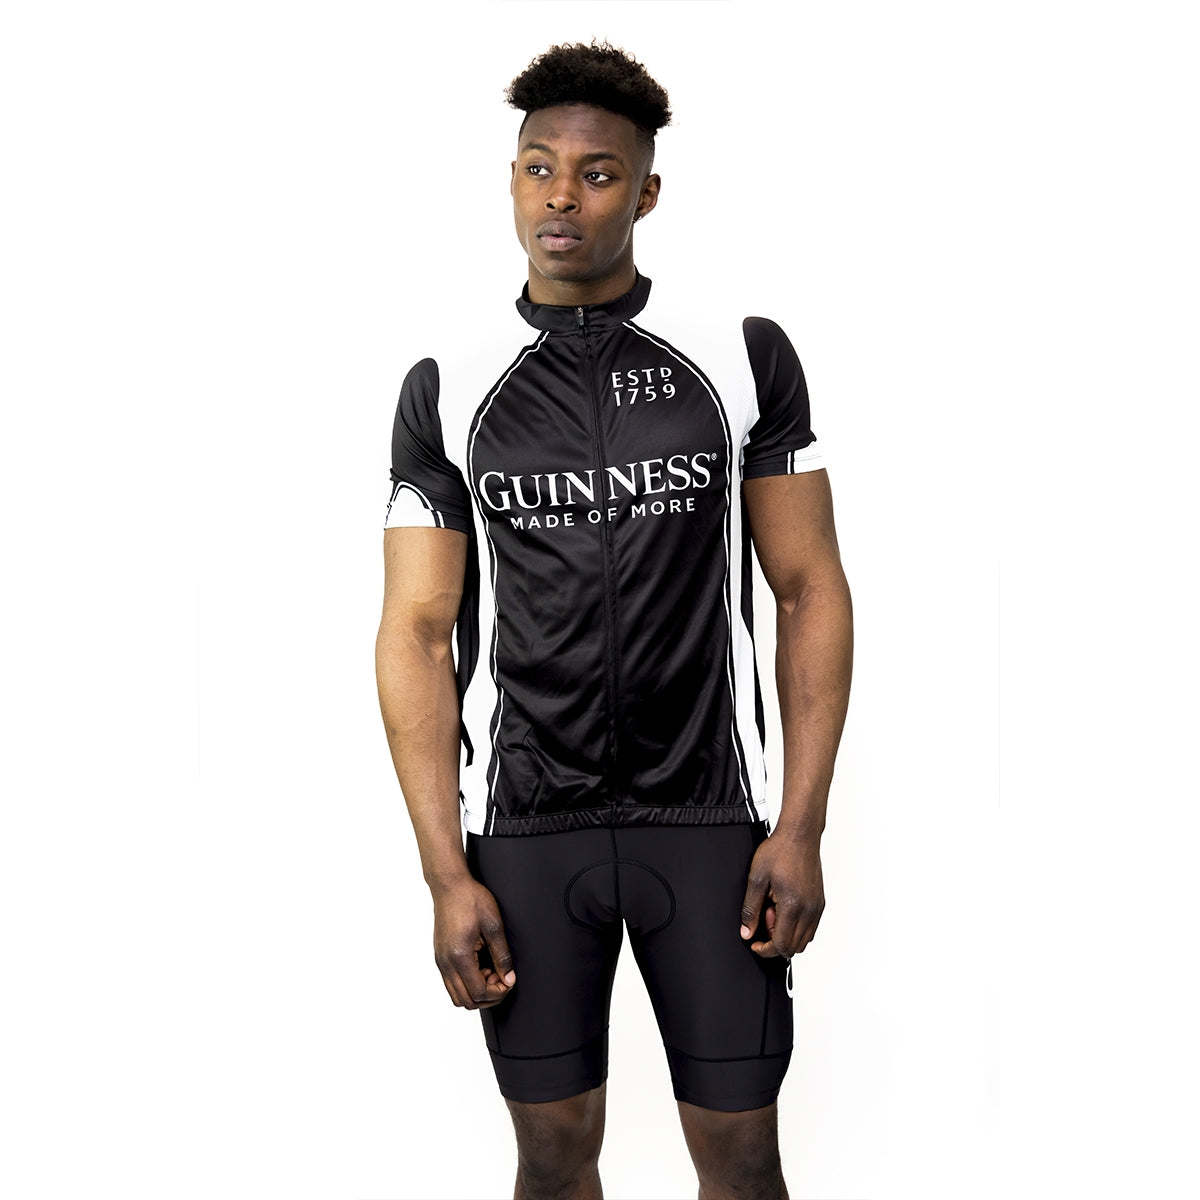 Guinness Performance Cycling Jersey